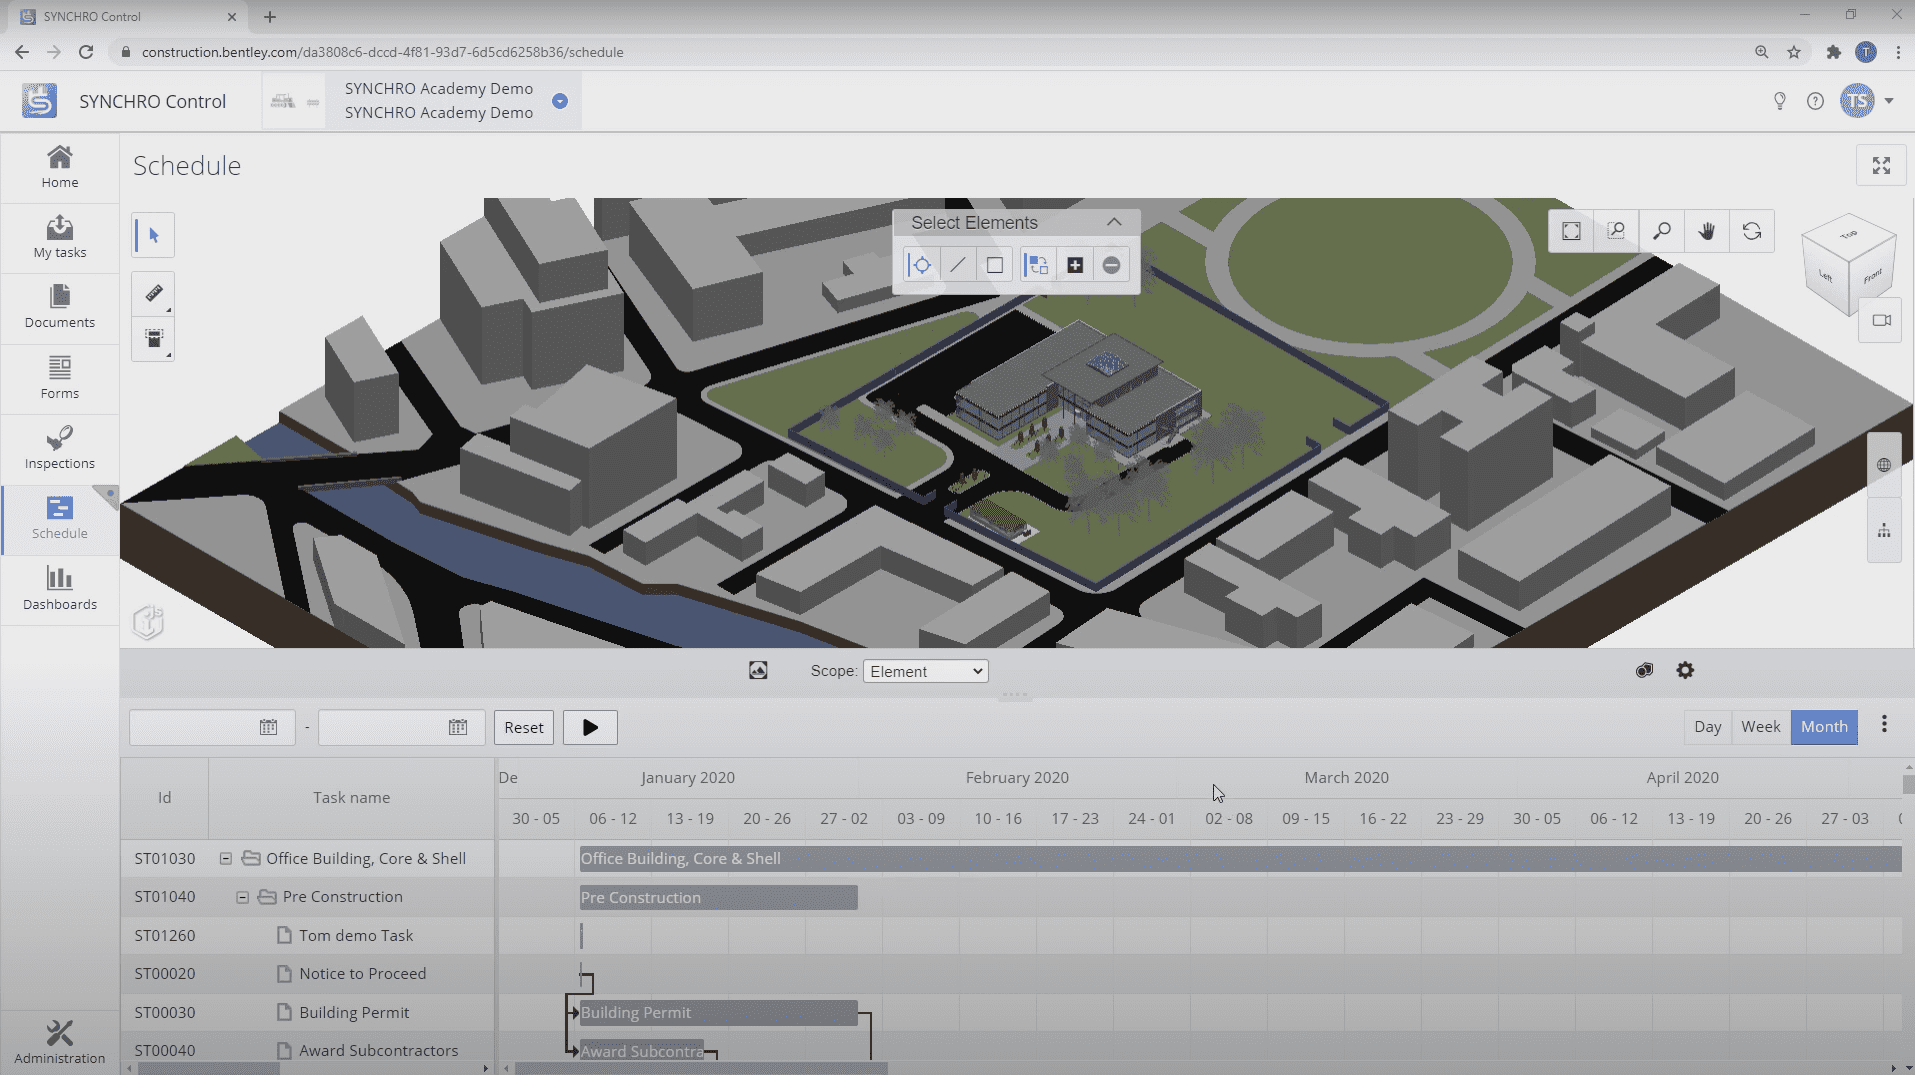 A screenshot of a construction project management software interface showing a 3d model of a building and a scheduling timeline.